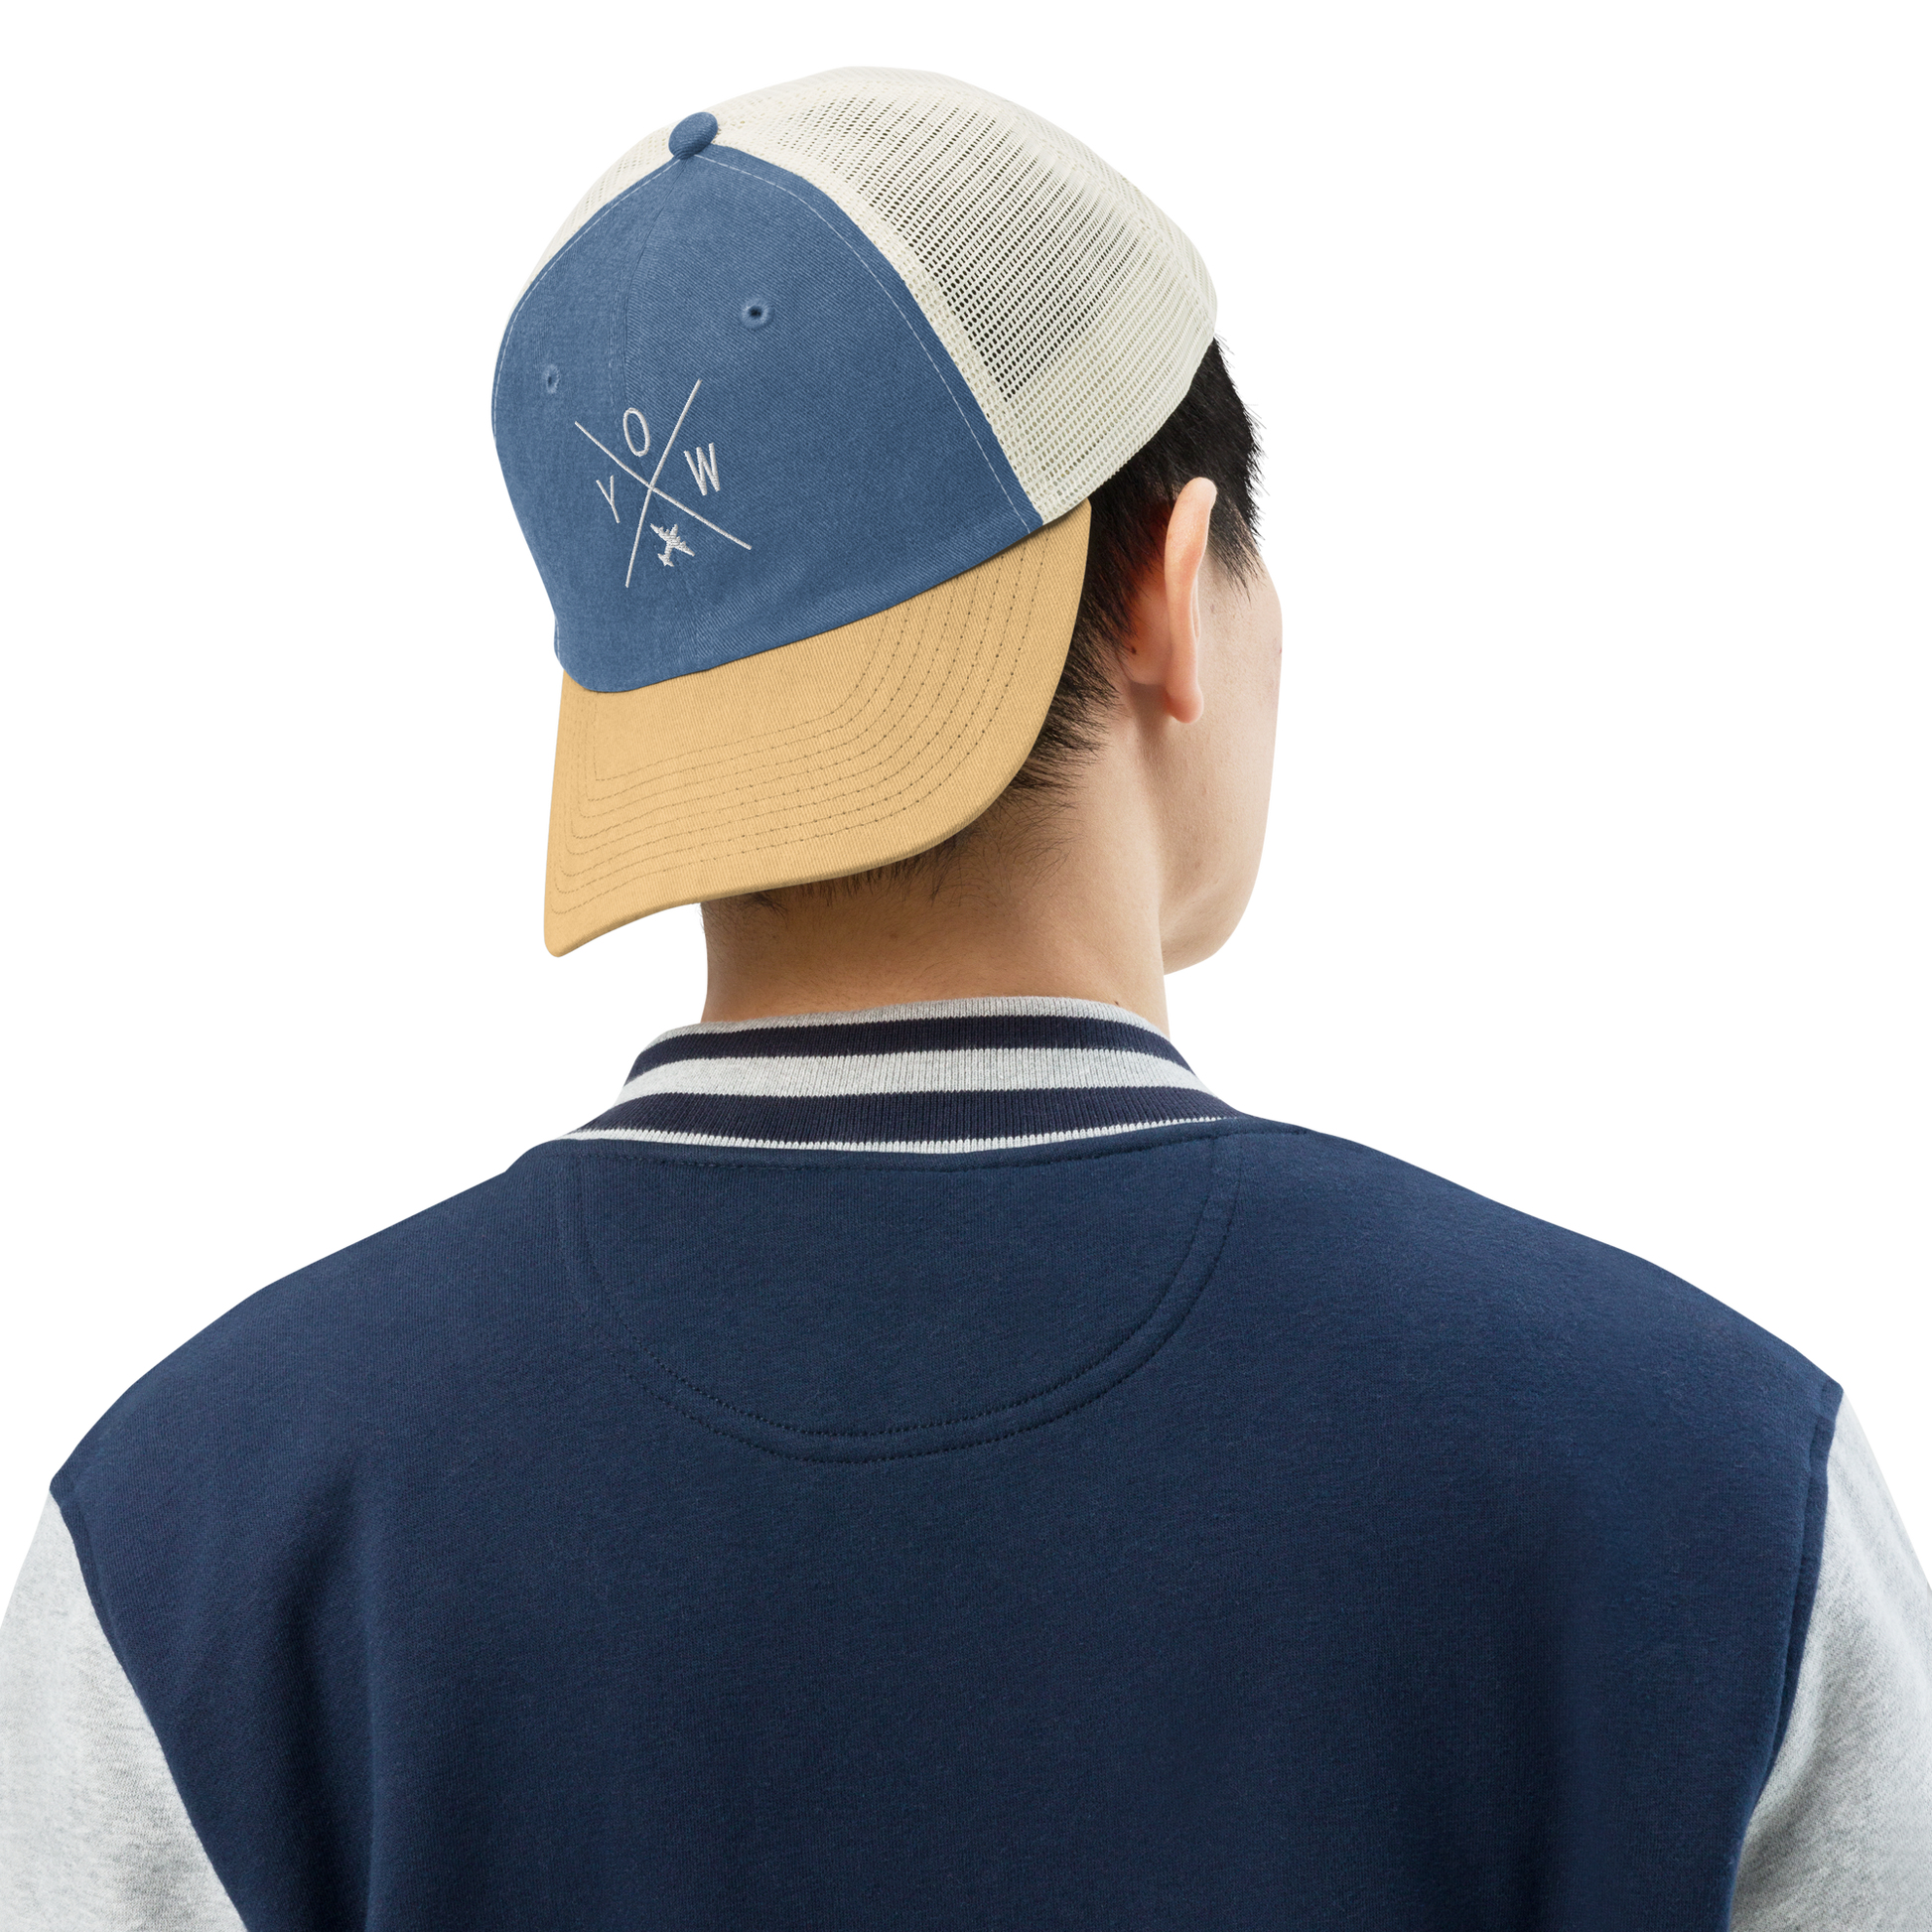 YHM Designs - YOW Ottawa Pigment-Dyed Trucker Cap - Crossed-X Design with Airport Code and Vintage Propliner - White Embroidery - Image 04